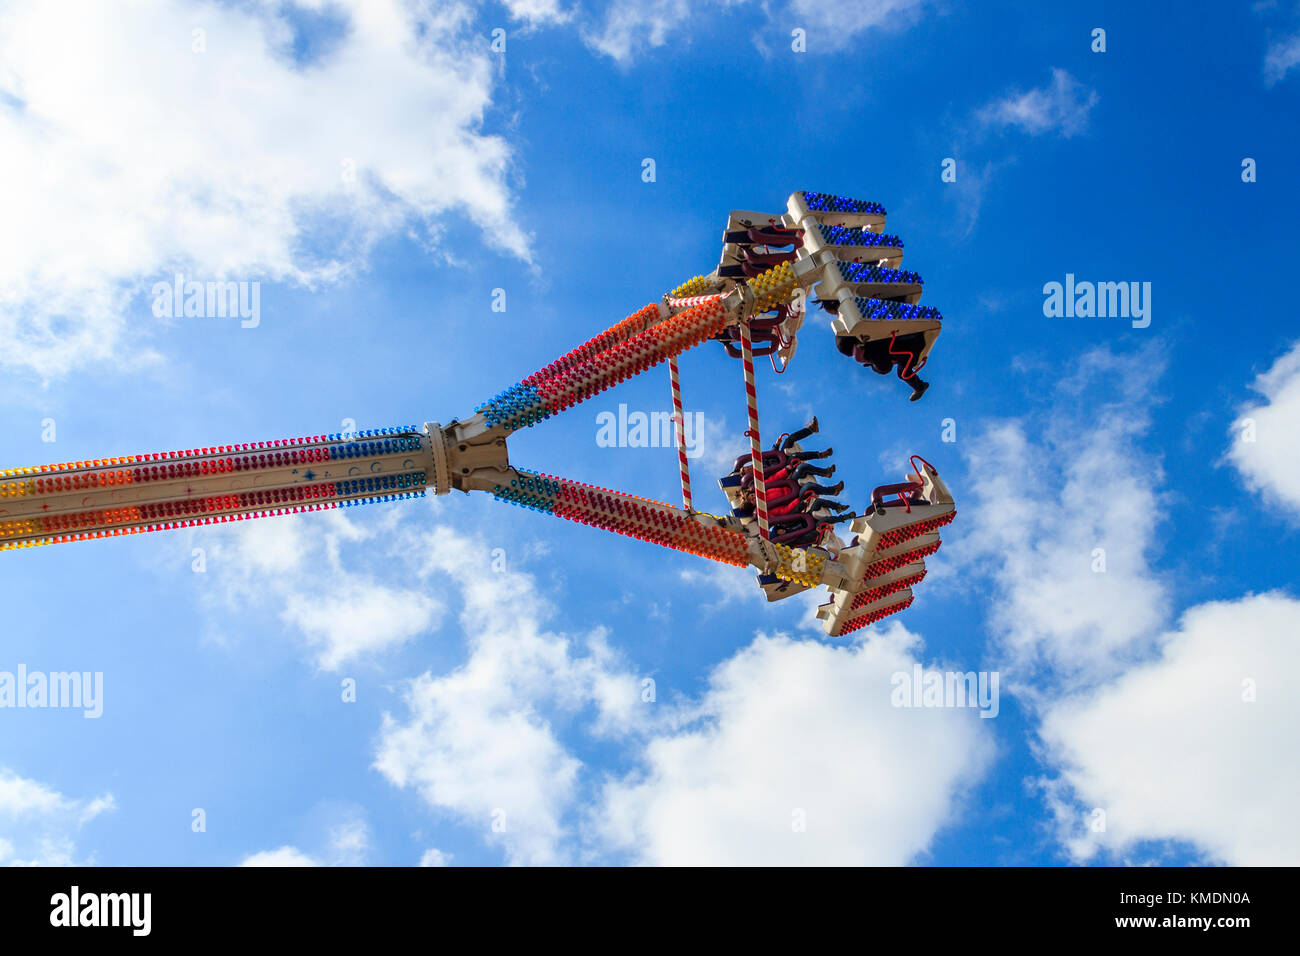 'Freak Out' fairground ride at a bank holiday weekend fair in London, UK Stock Photo